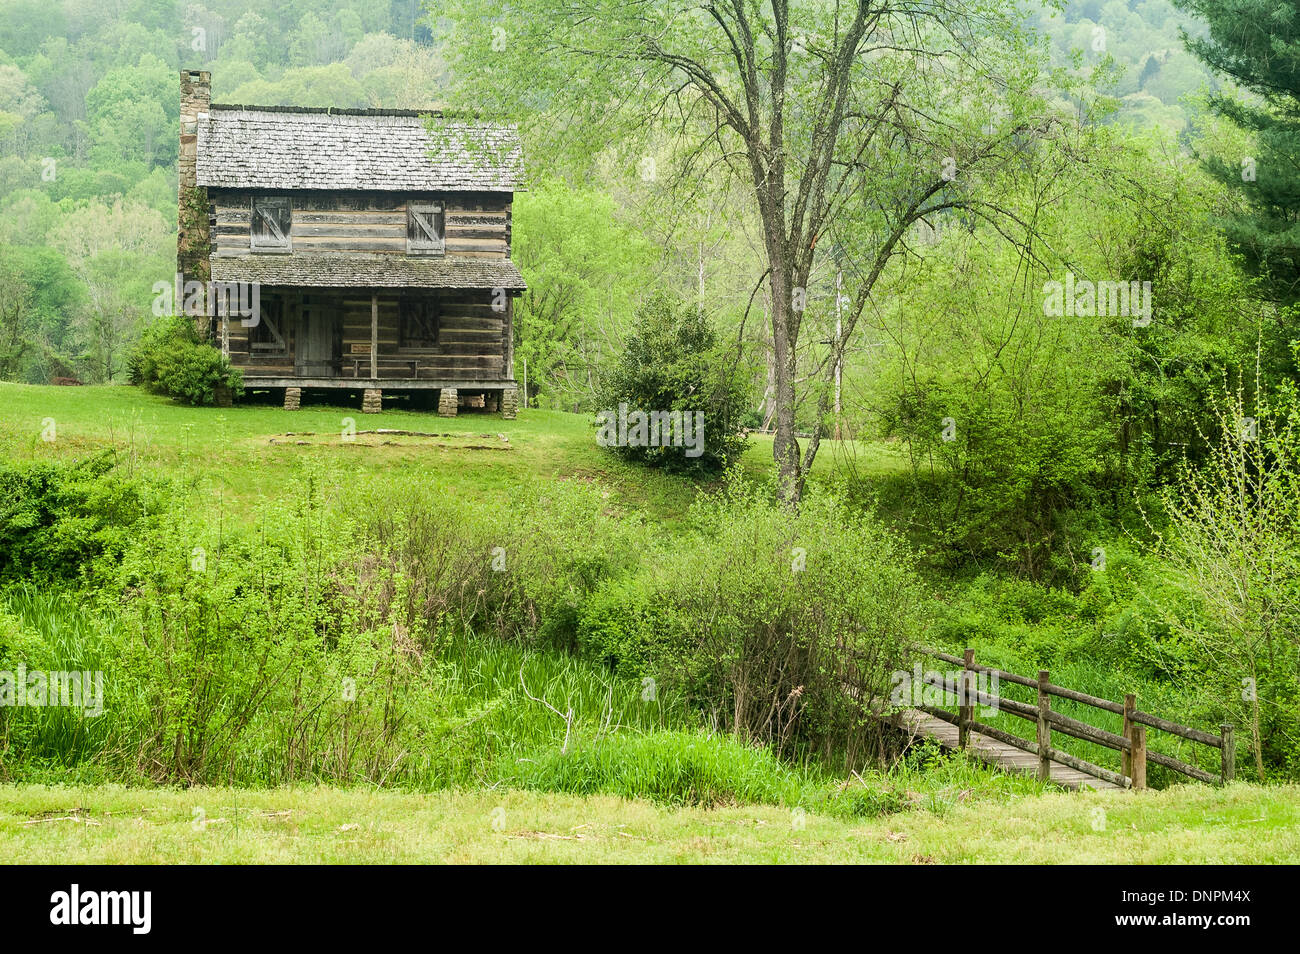 Gladie Cabin, Gladie Cultural-Environmental Learning Center & Historic Site, Red River Gorge, Kentucky, USA Stock Photo